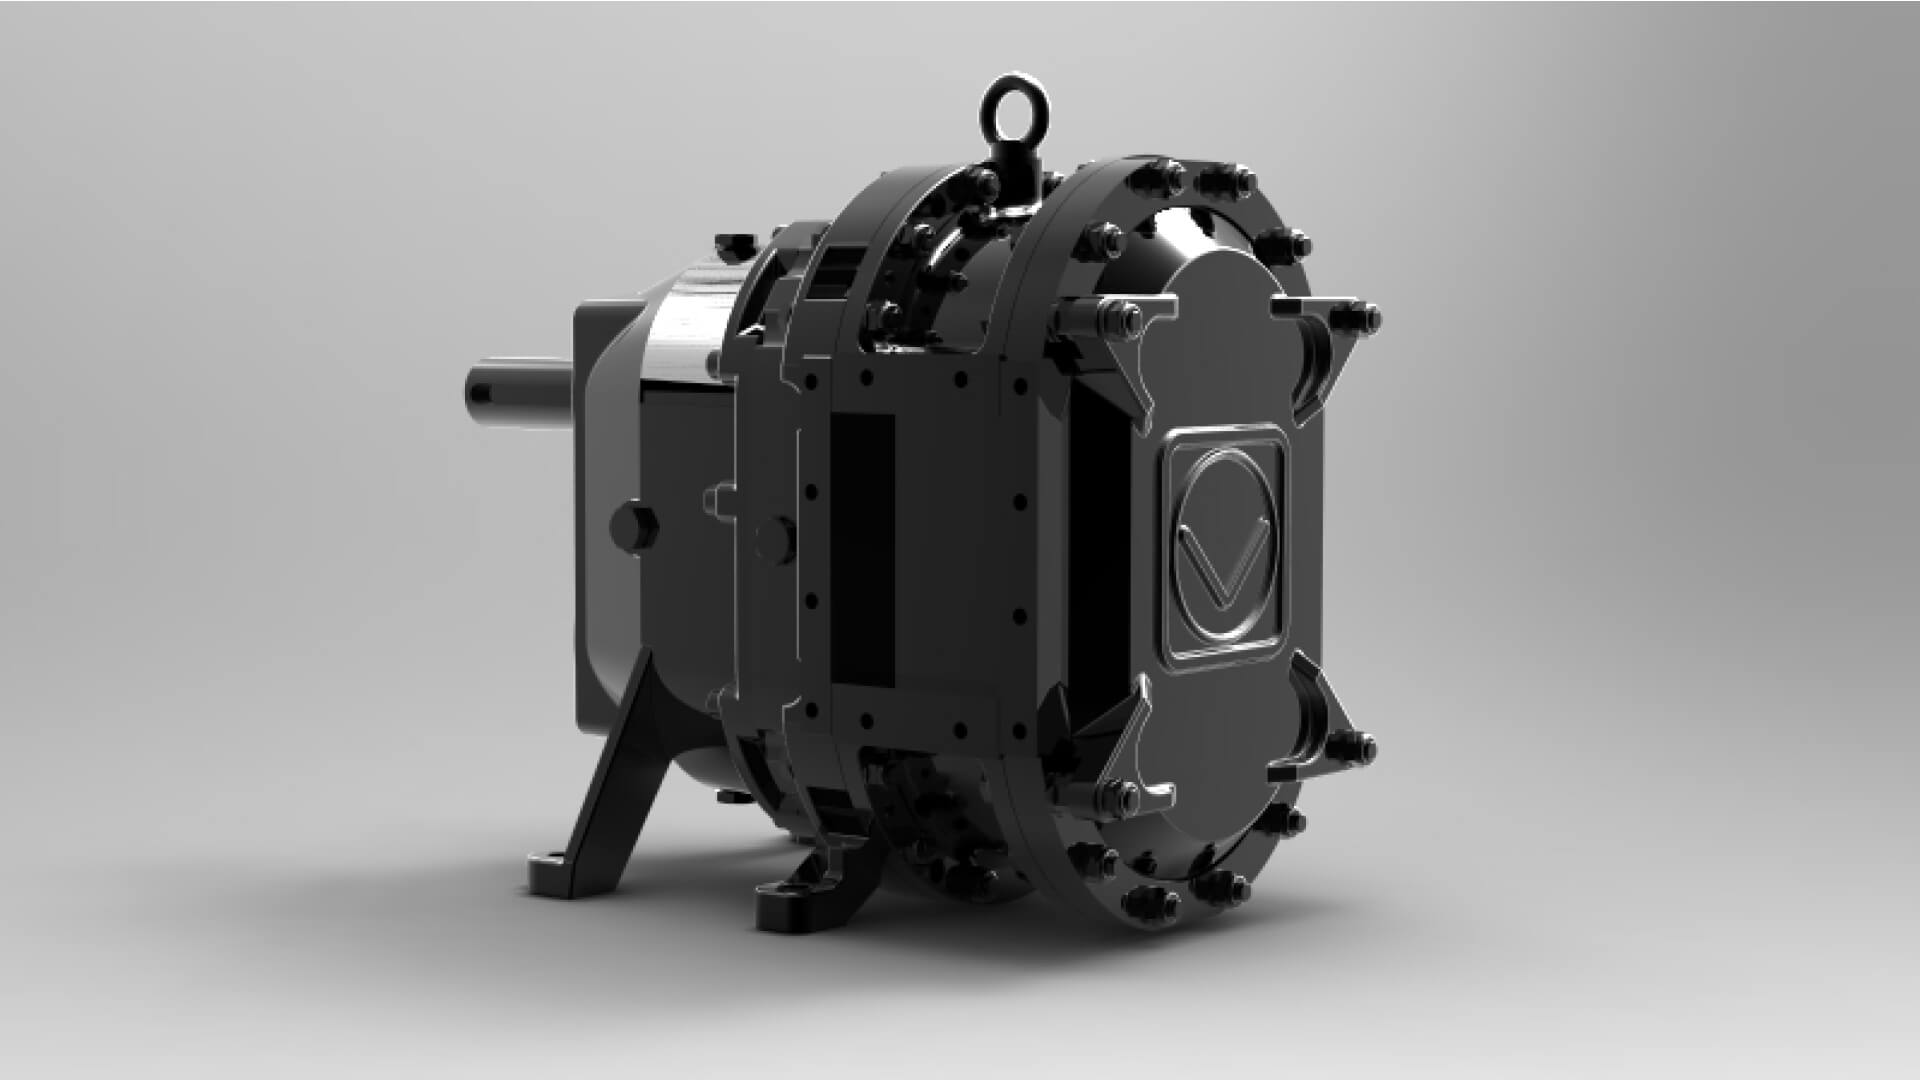 A 3D CAD drawing of the interior of an industrial rotary lobe pump.